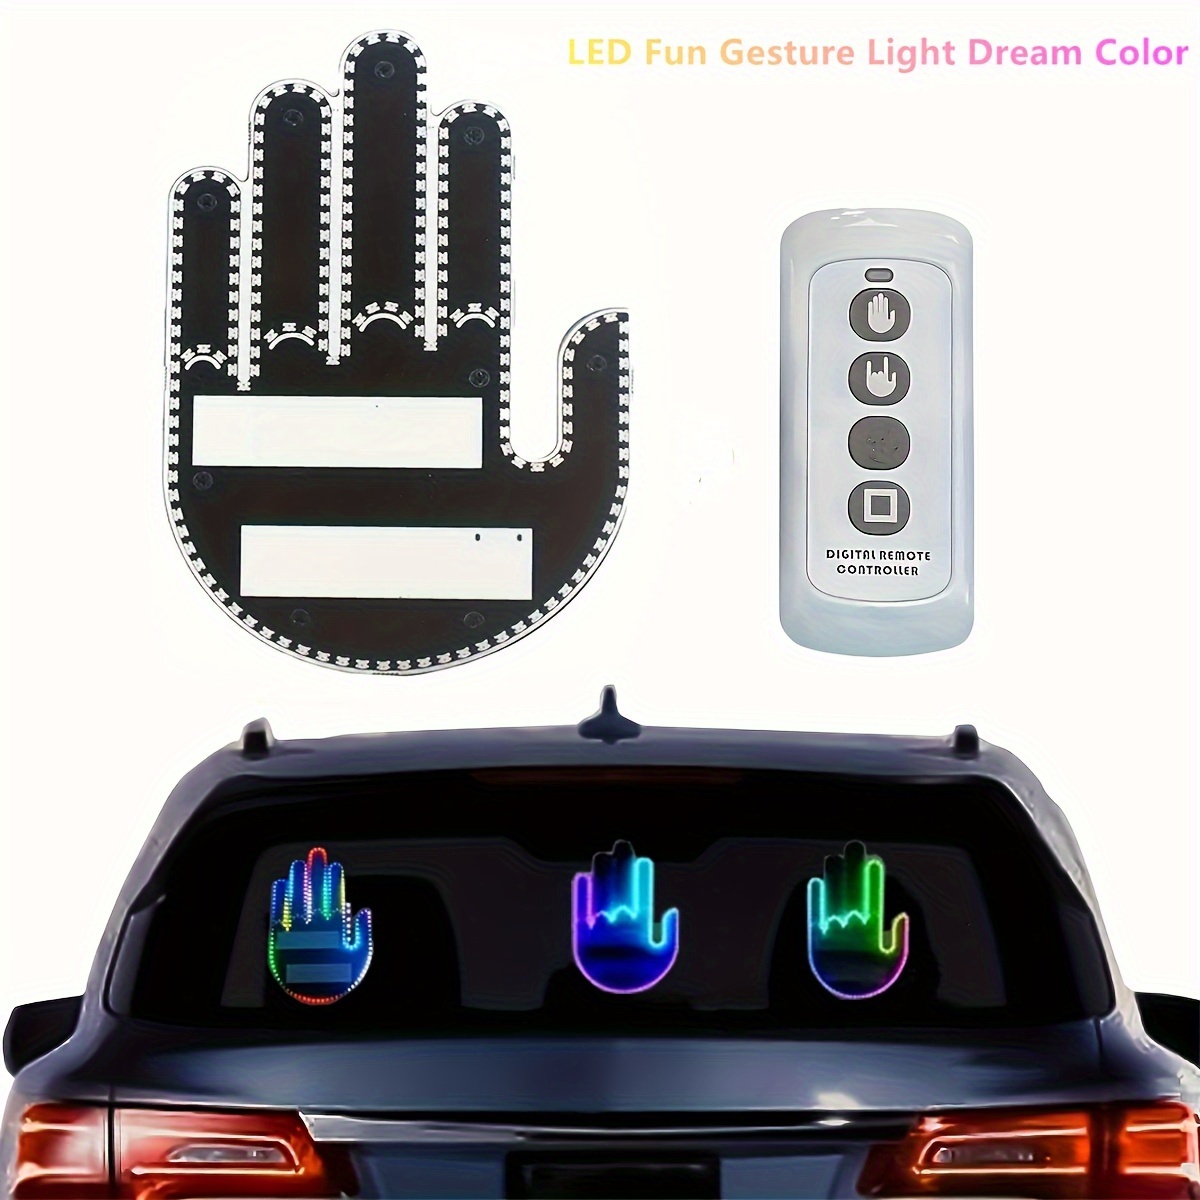 New LED Illuminated Gesture Light Car Finger Light With Remote